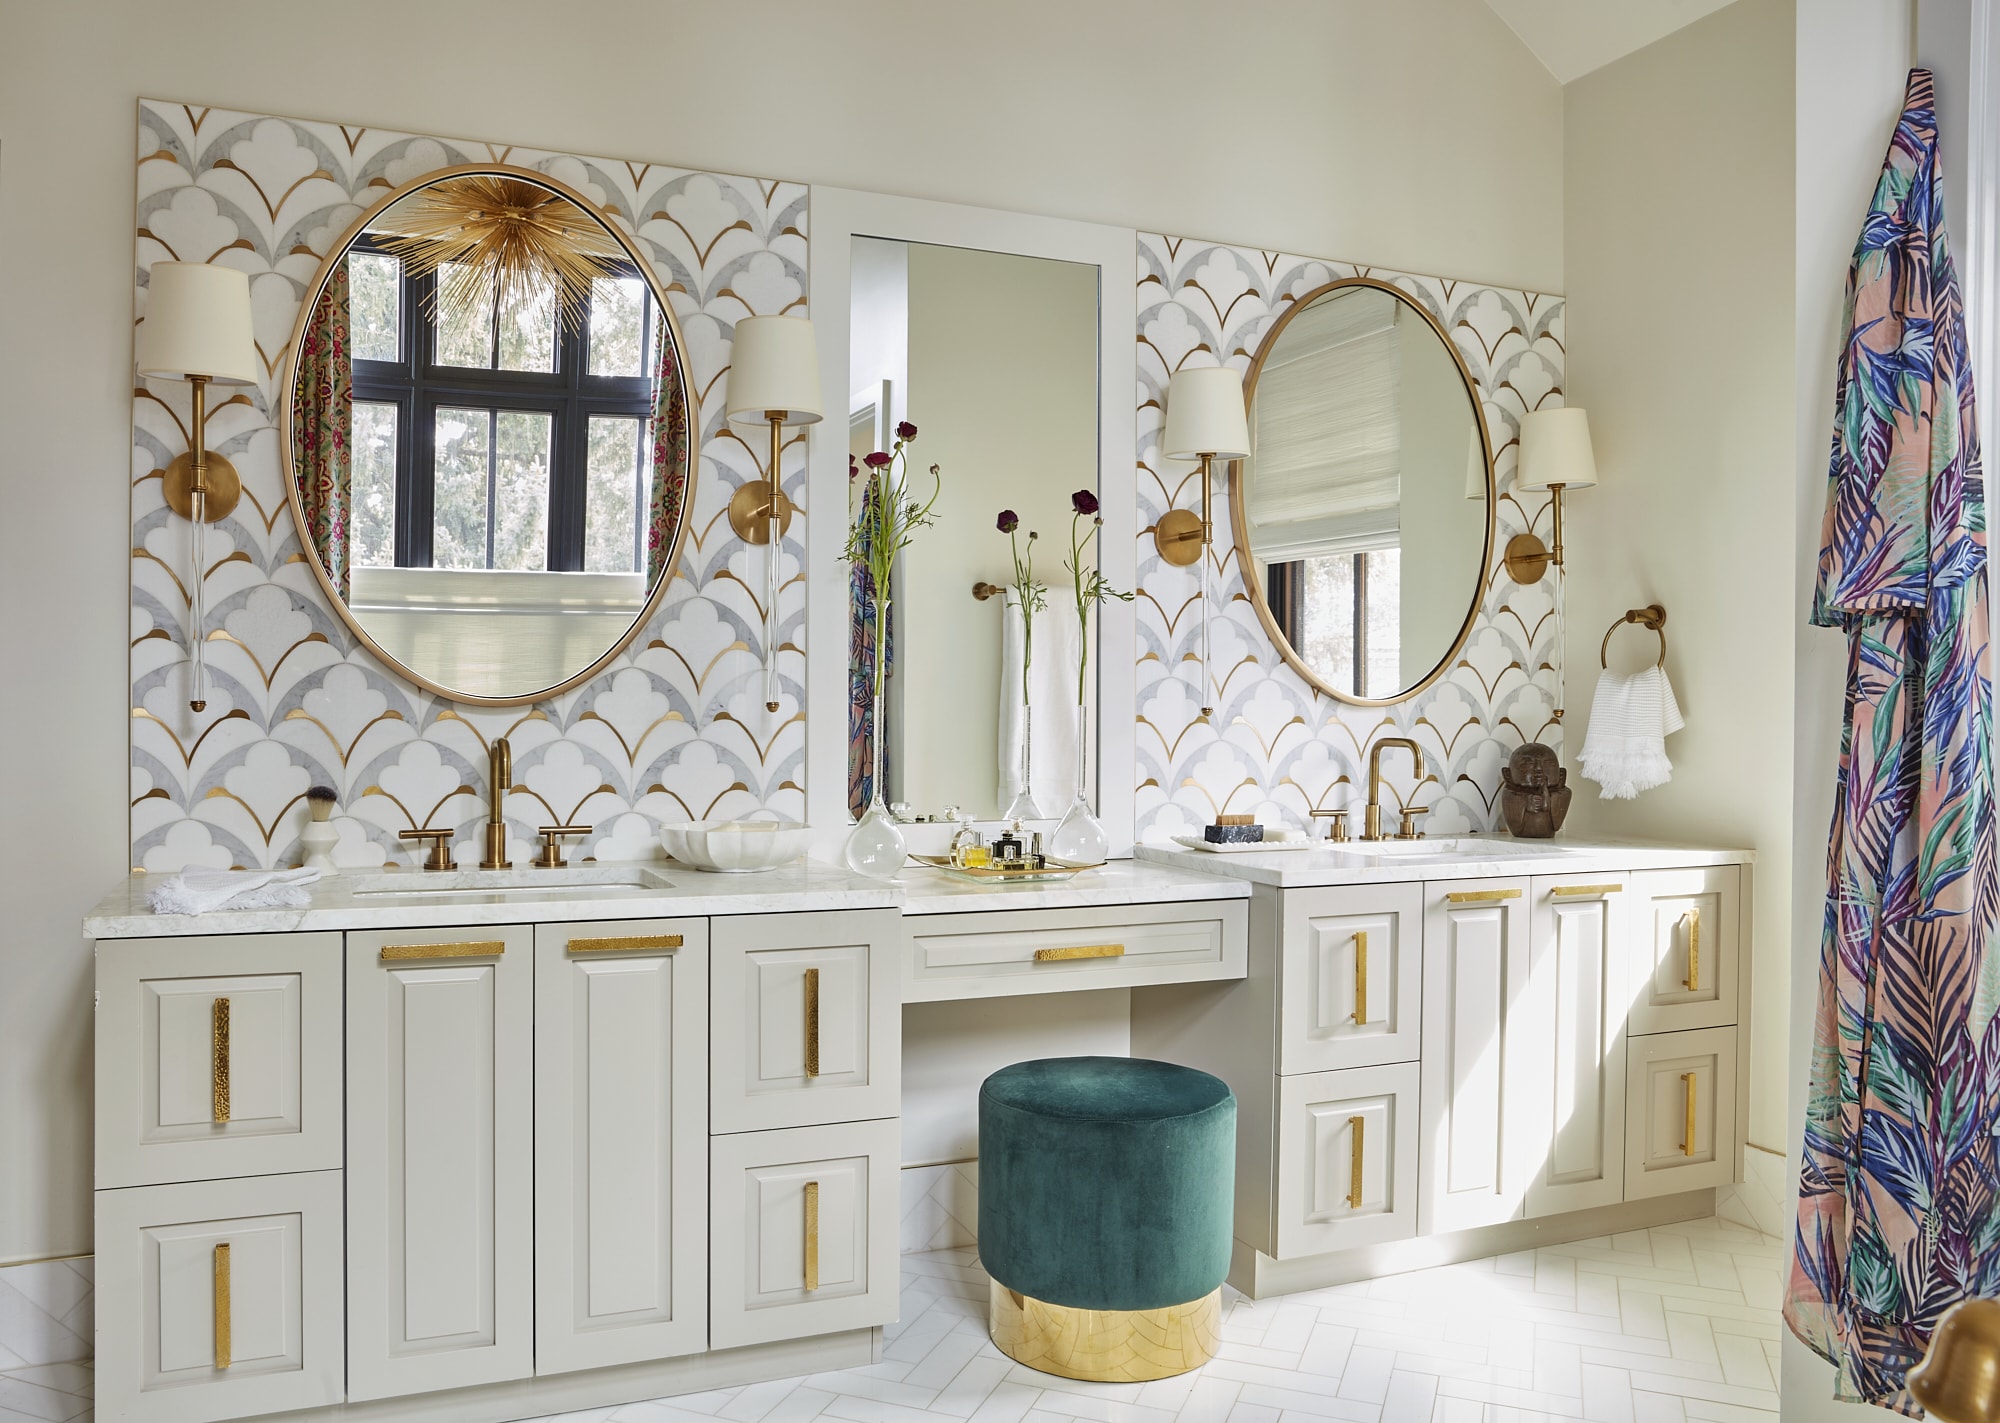 Gorgeous luxurious master bath with tiled walls